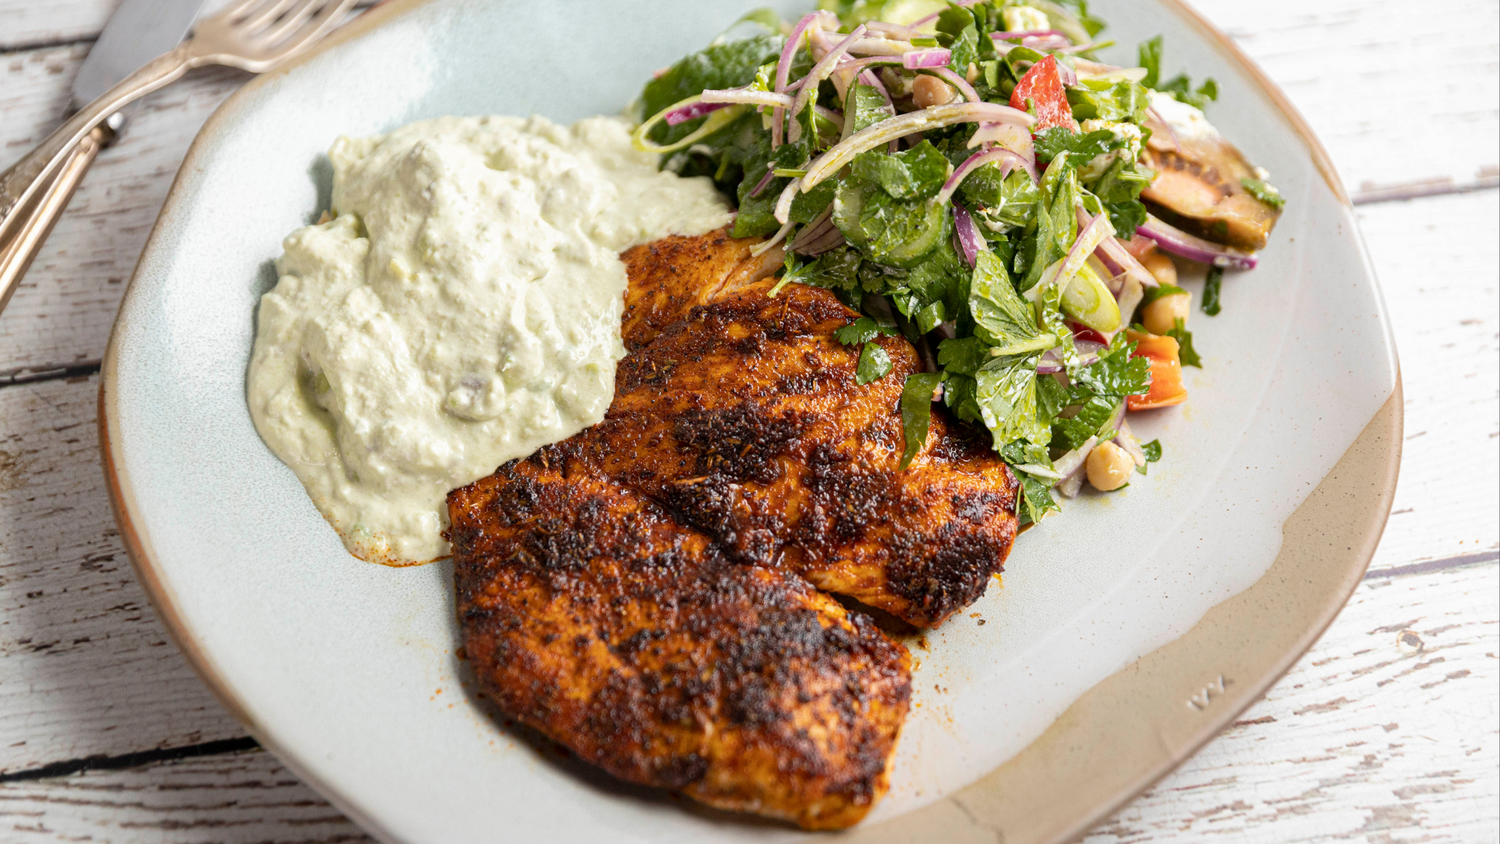 Grilled Chicken with Creamy Avocado Dressing